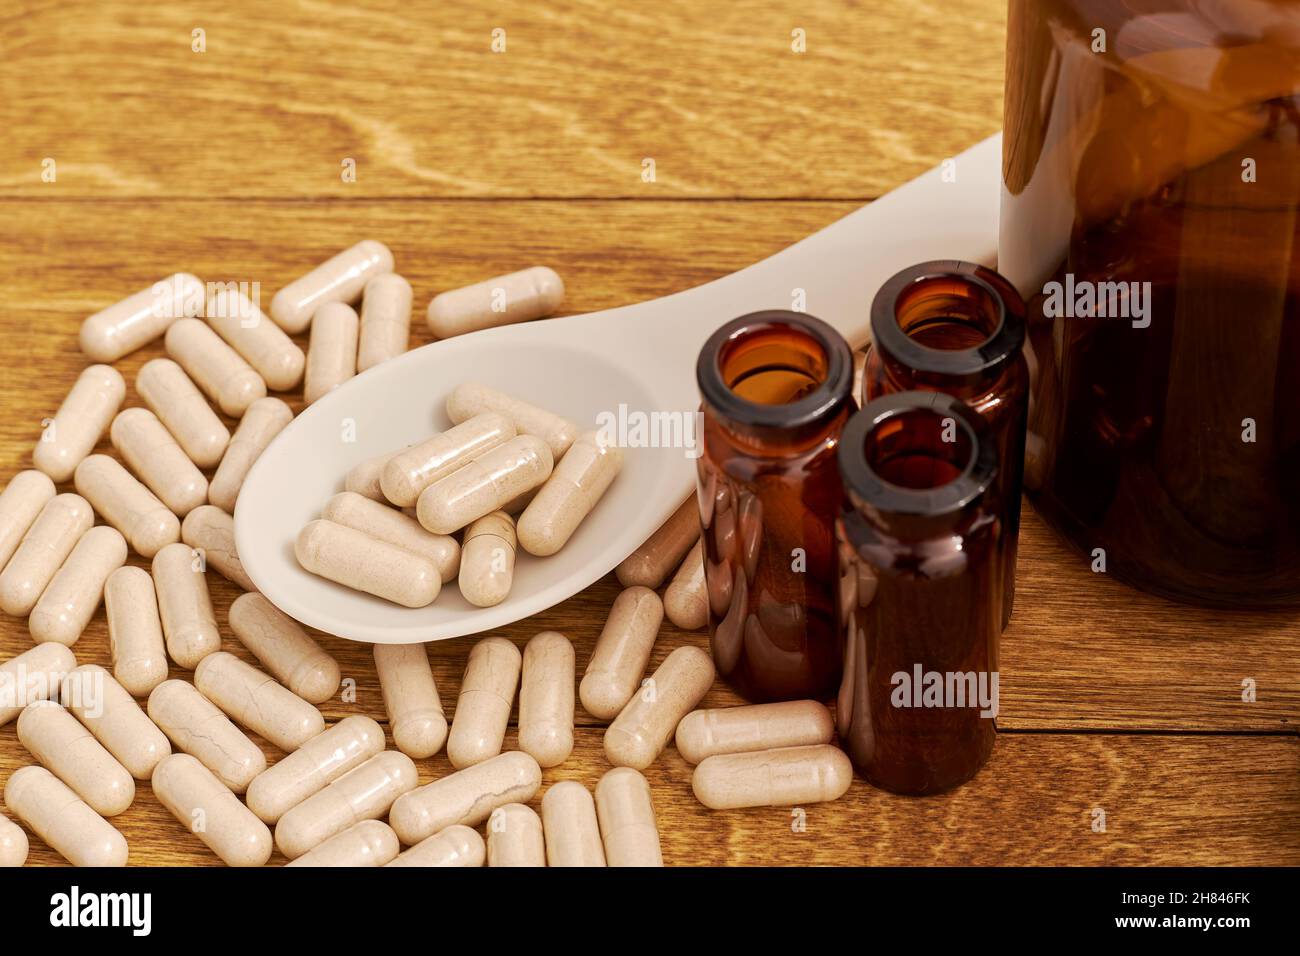 Spoon overdose with an overdose of diet pills on the wooden table. Drug obsession concept Stock Photo